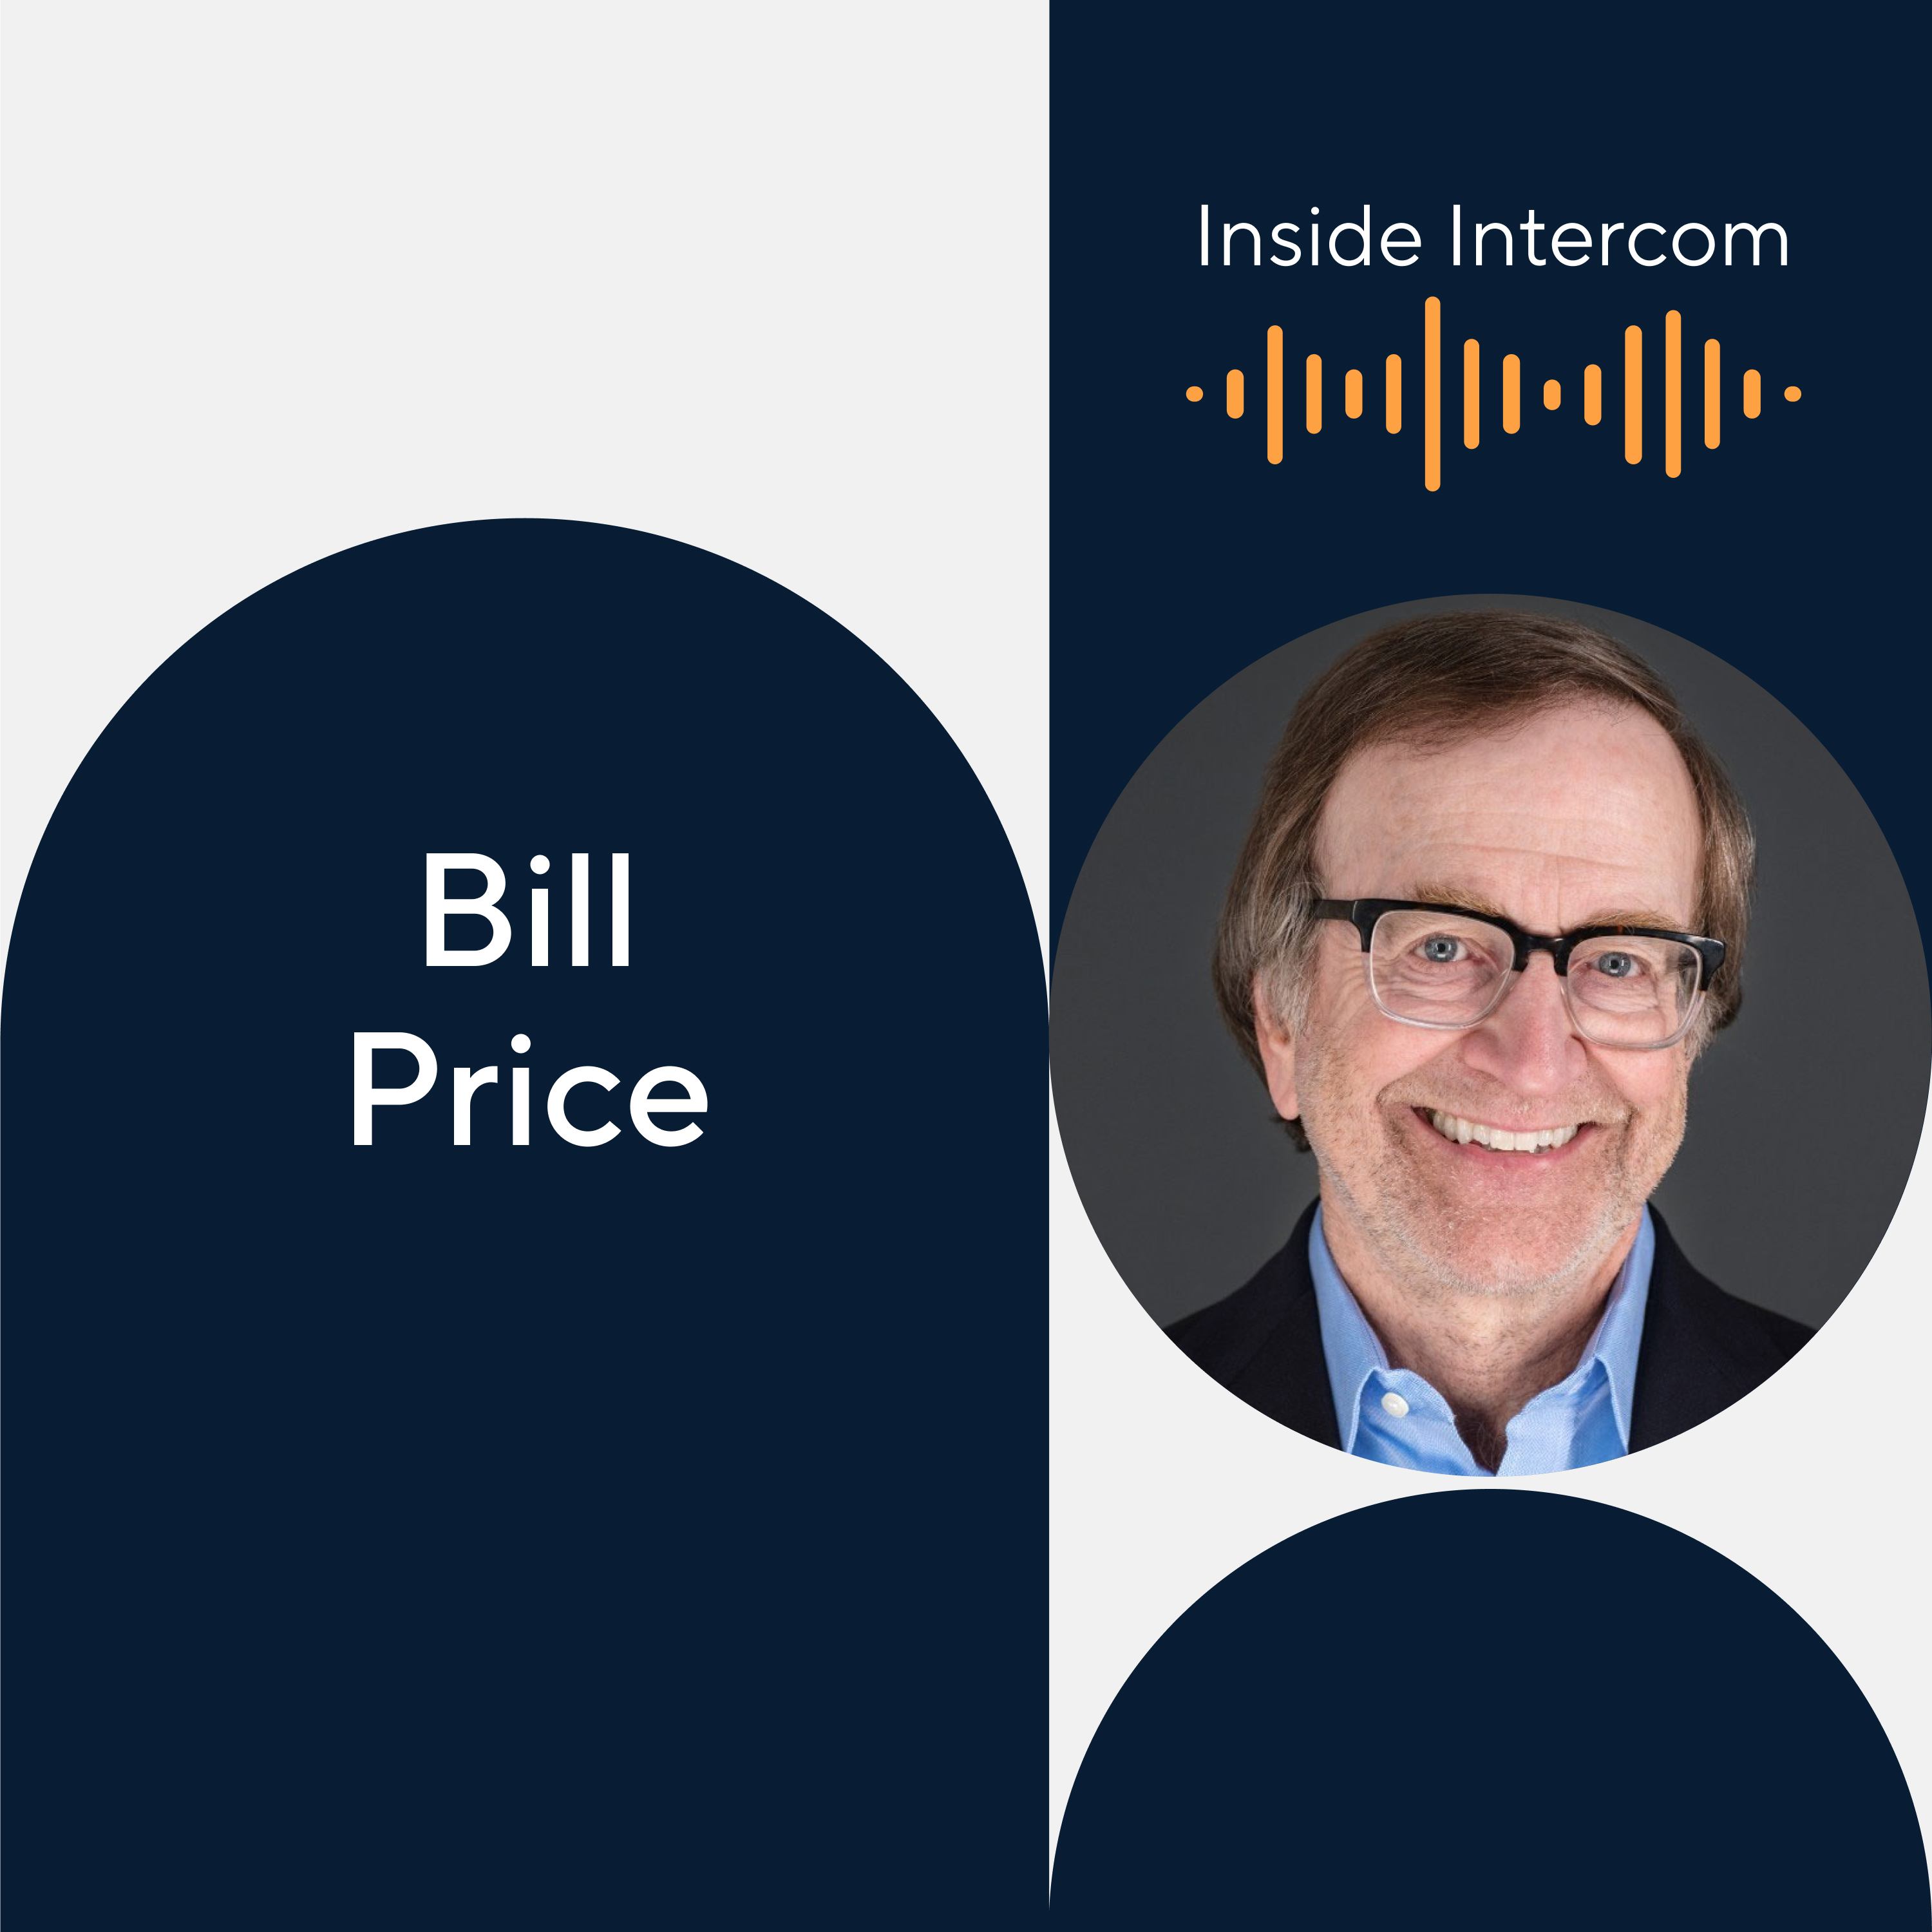 CX expert Bill Price on creating frictionless customer experiences